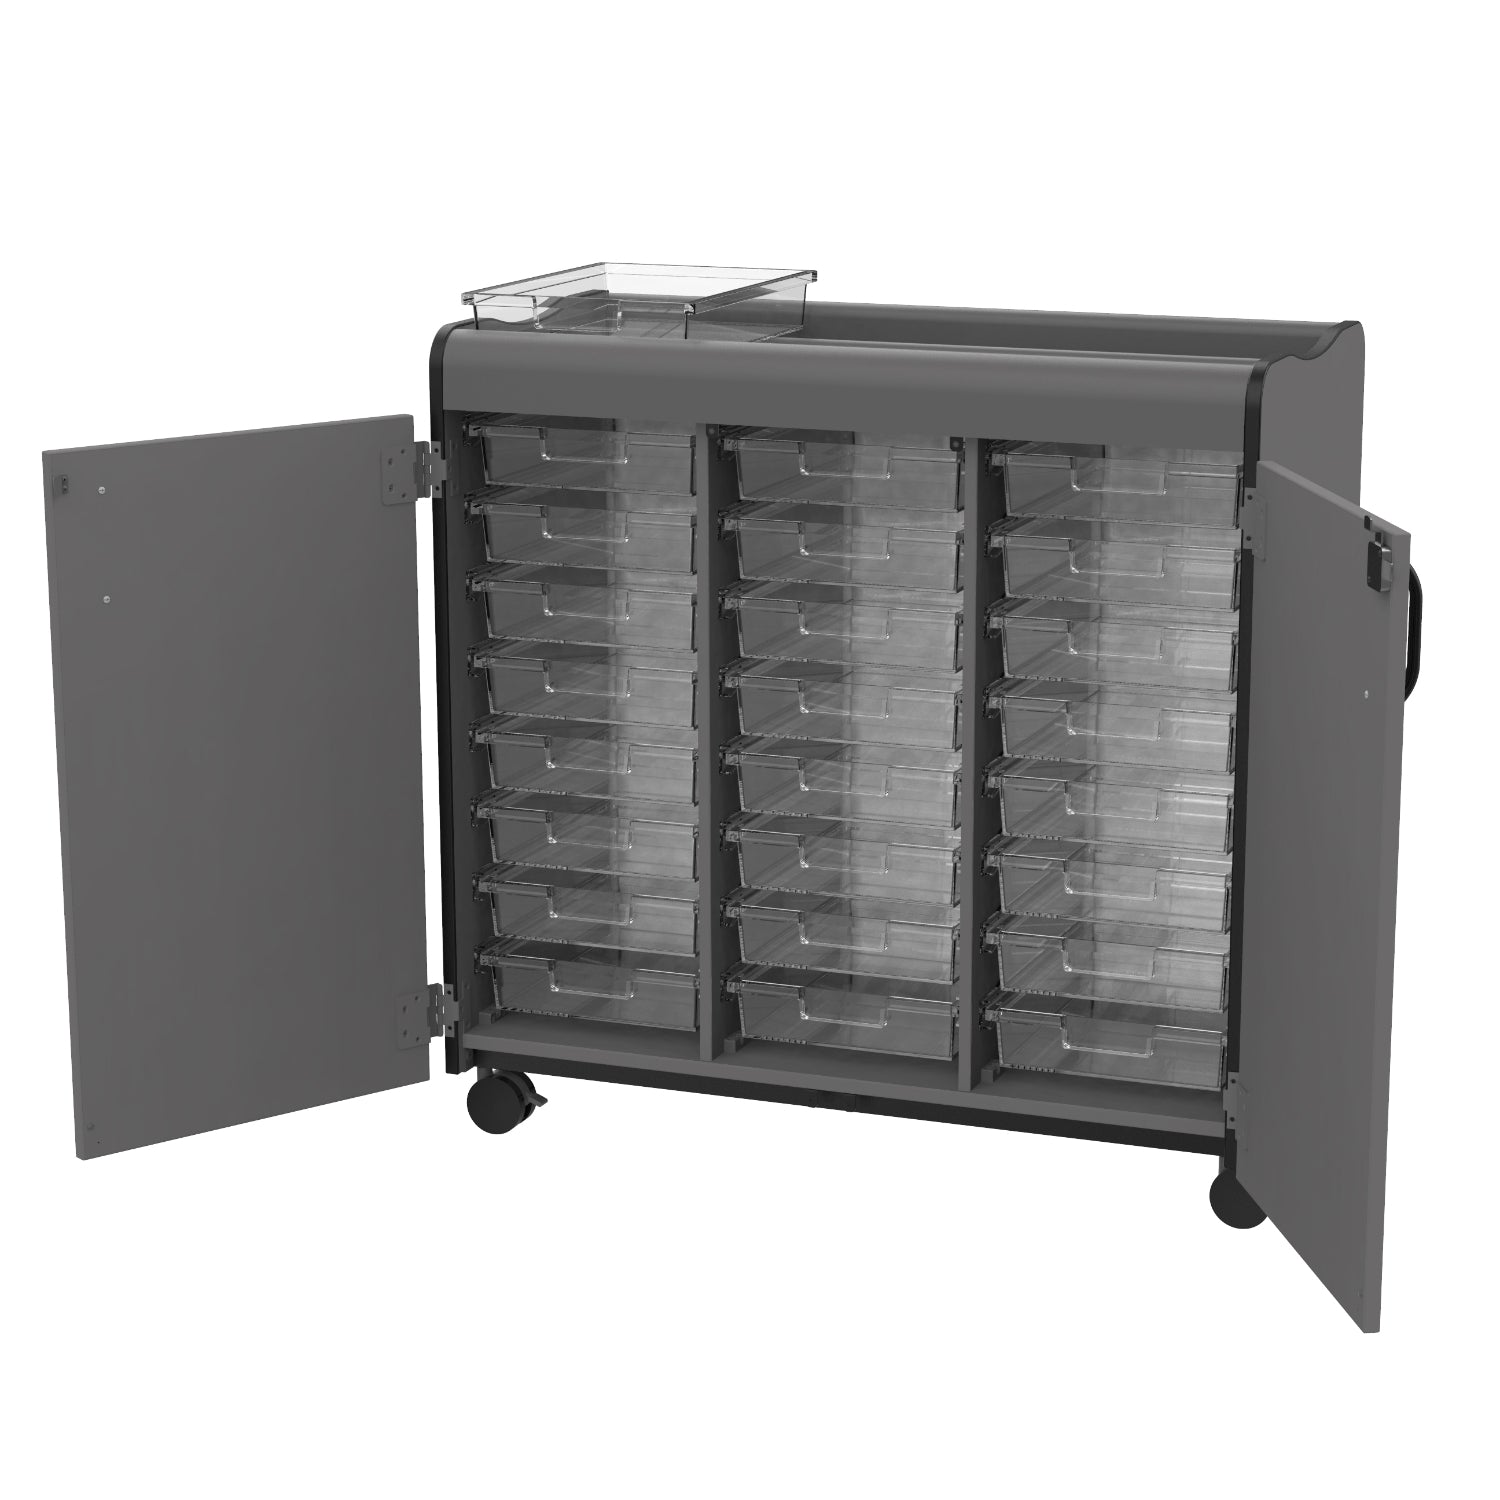 Horizon Makerspace Series 24-Tray Mobile Storage Cart with Doors